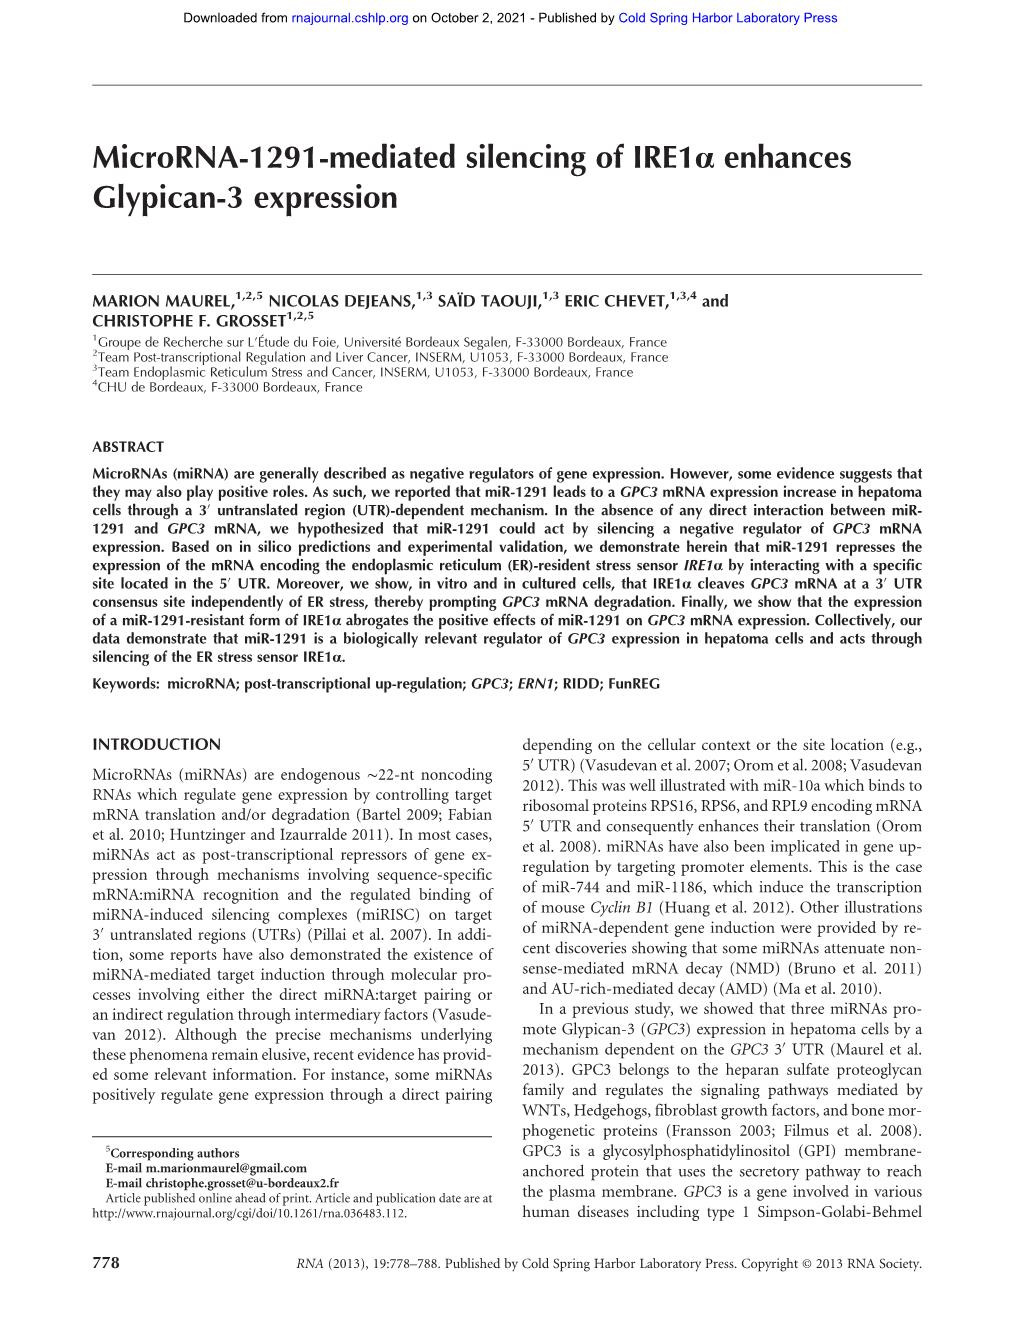 Microrna-1291-Mediated Silencing of Ire1α Enhances Glypican-3 Expression